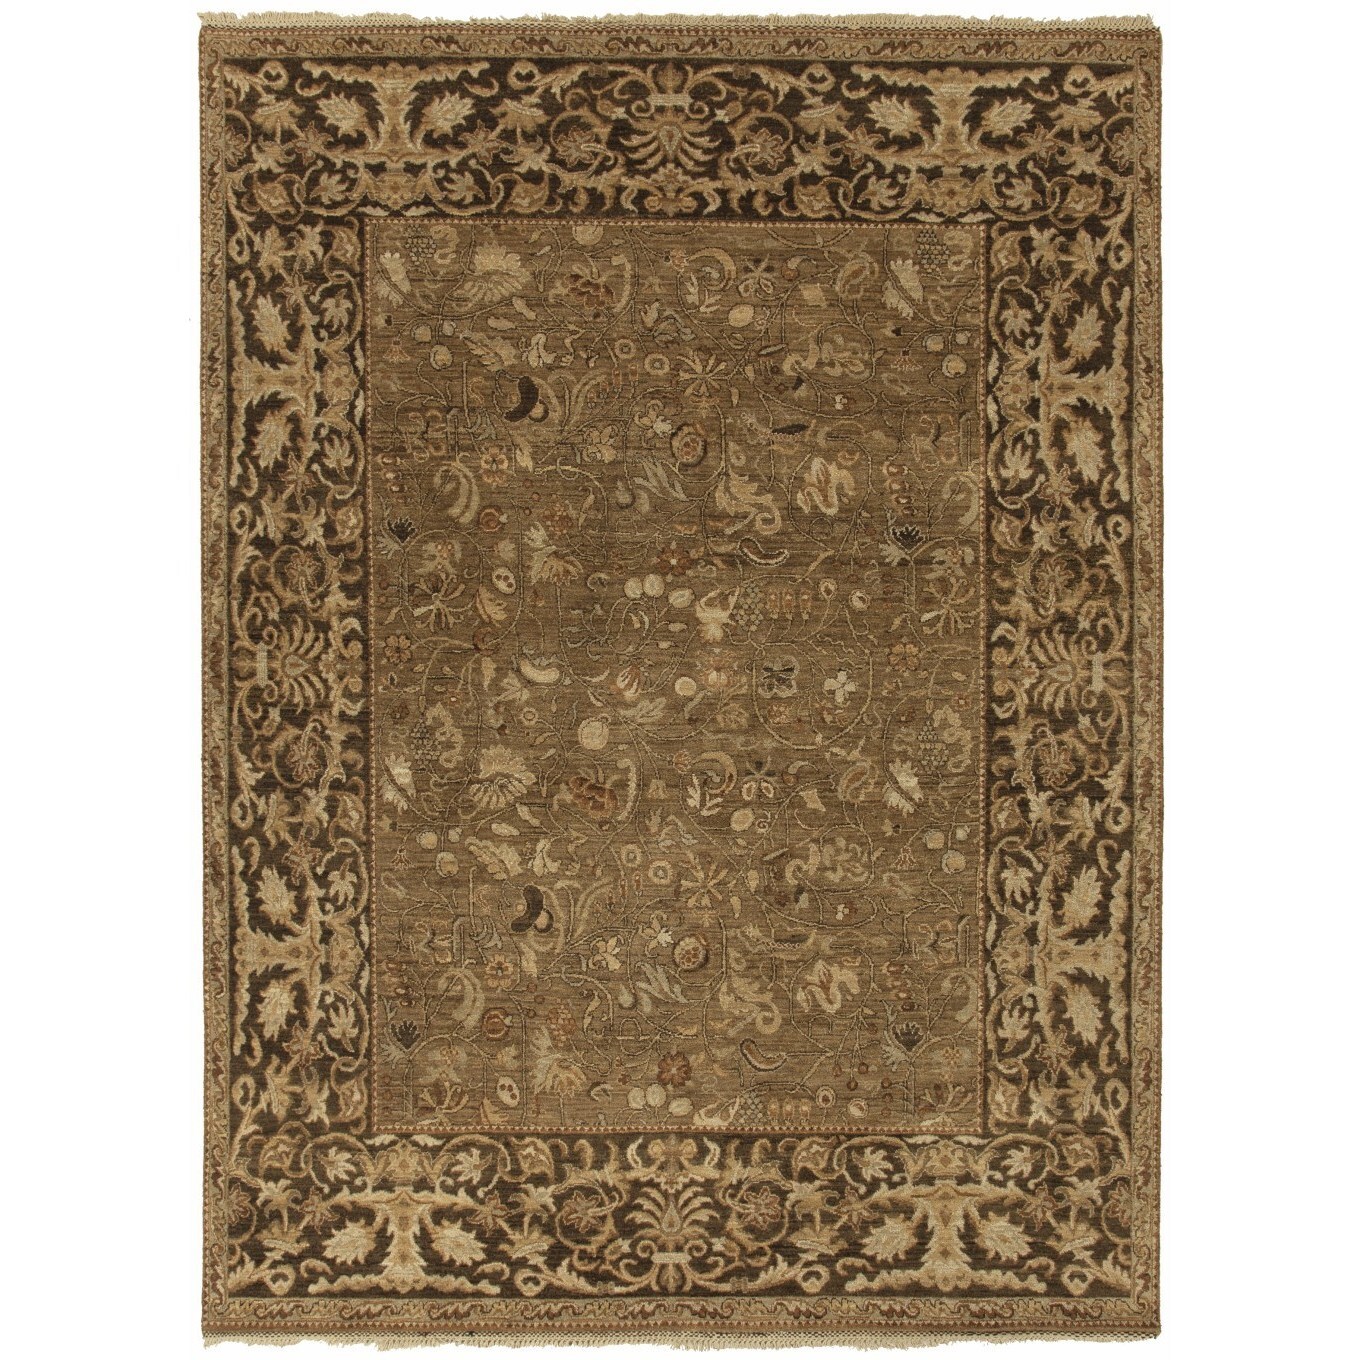 Hand knotted Beige/ Brown Floral Pattern Wool Rug (6 X 9)